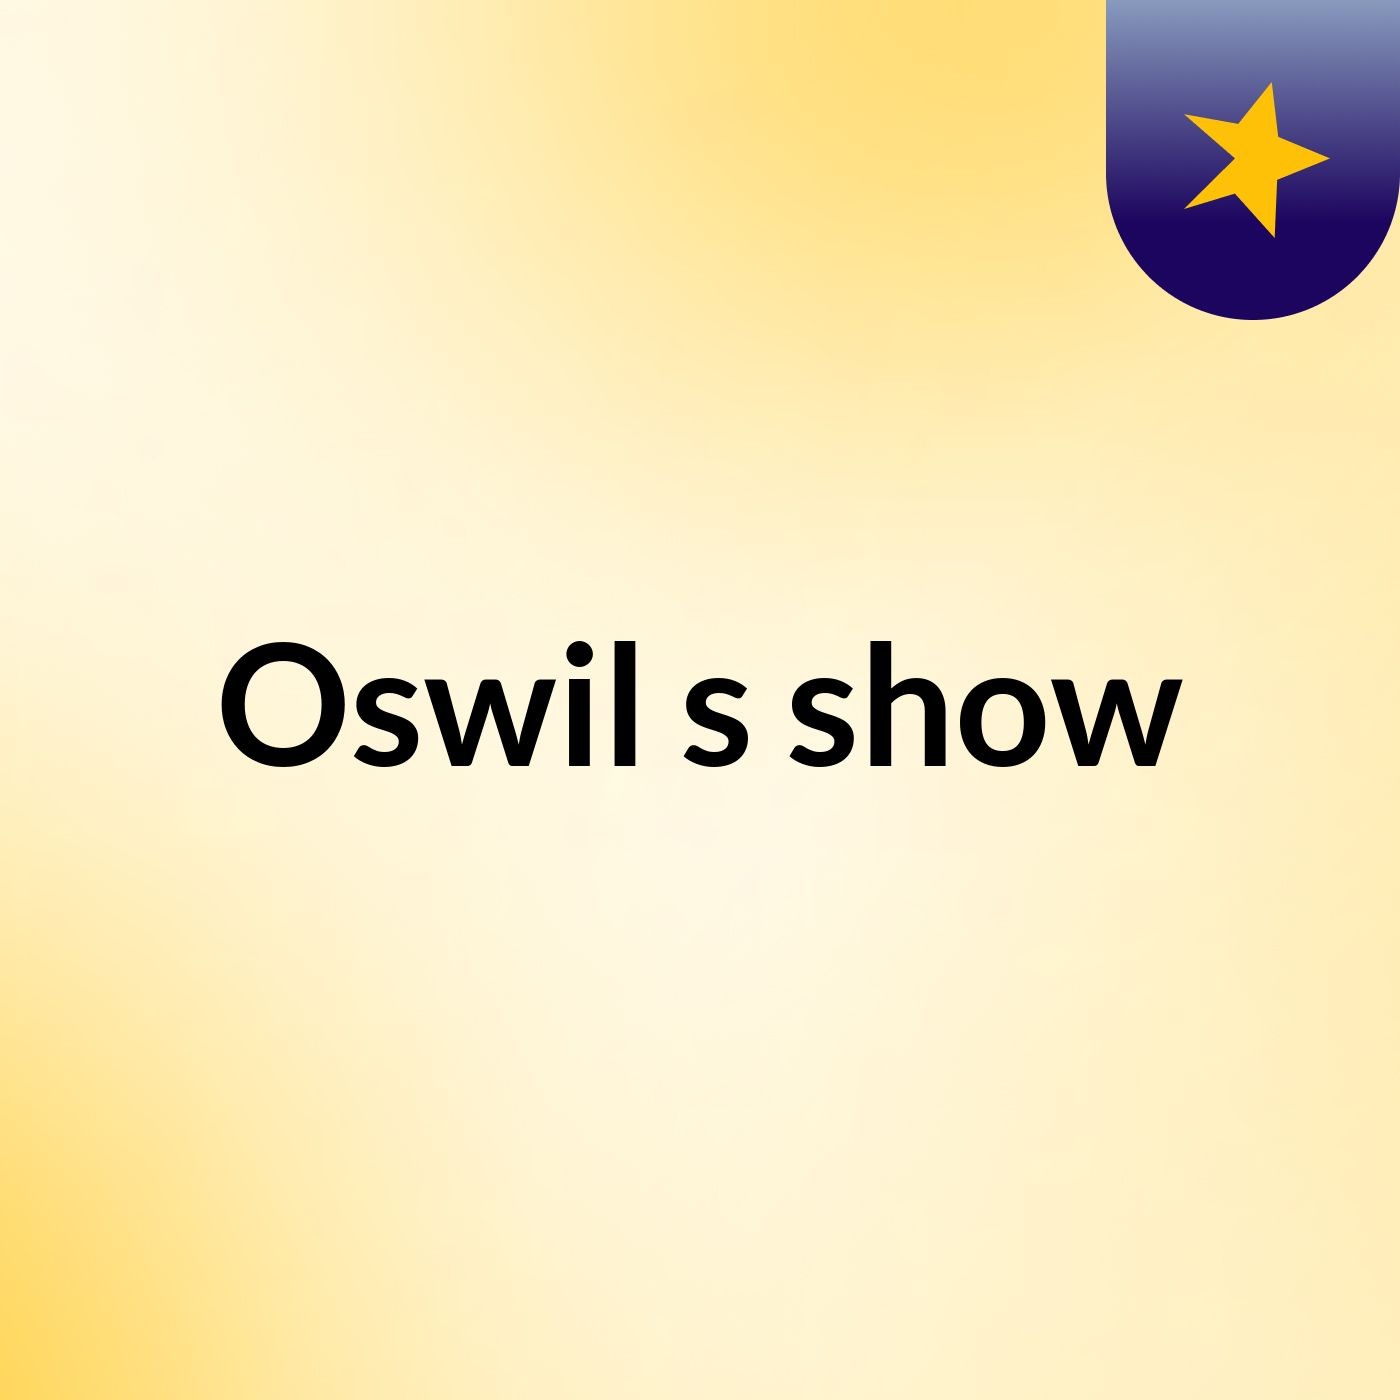 Oswil's show